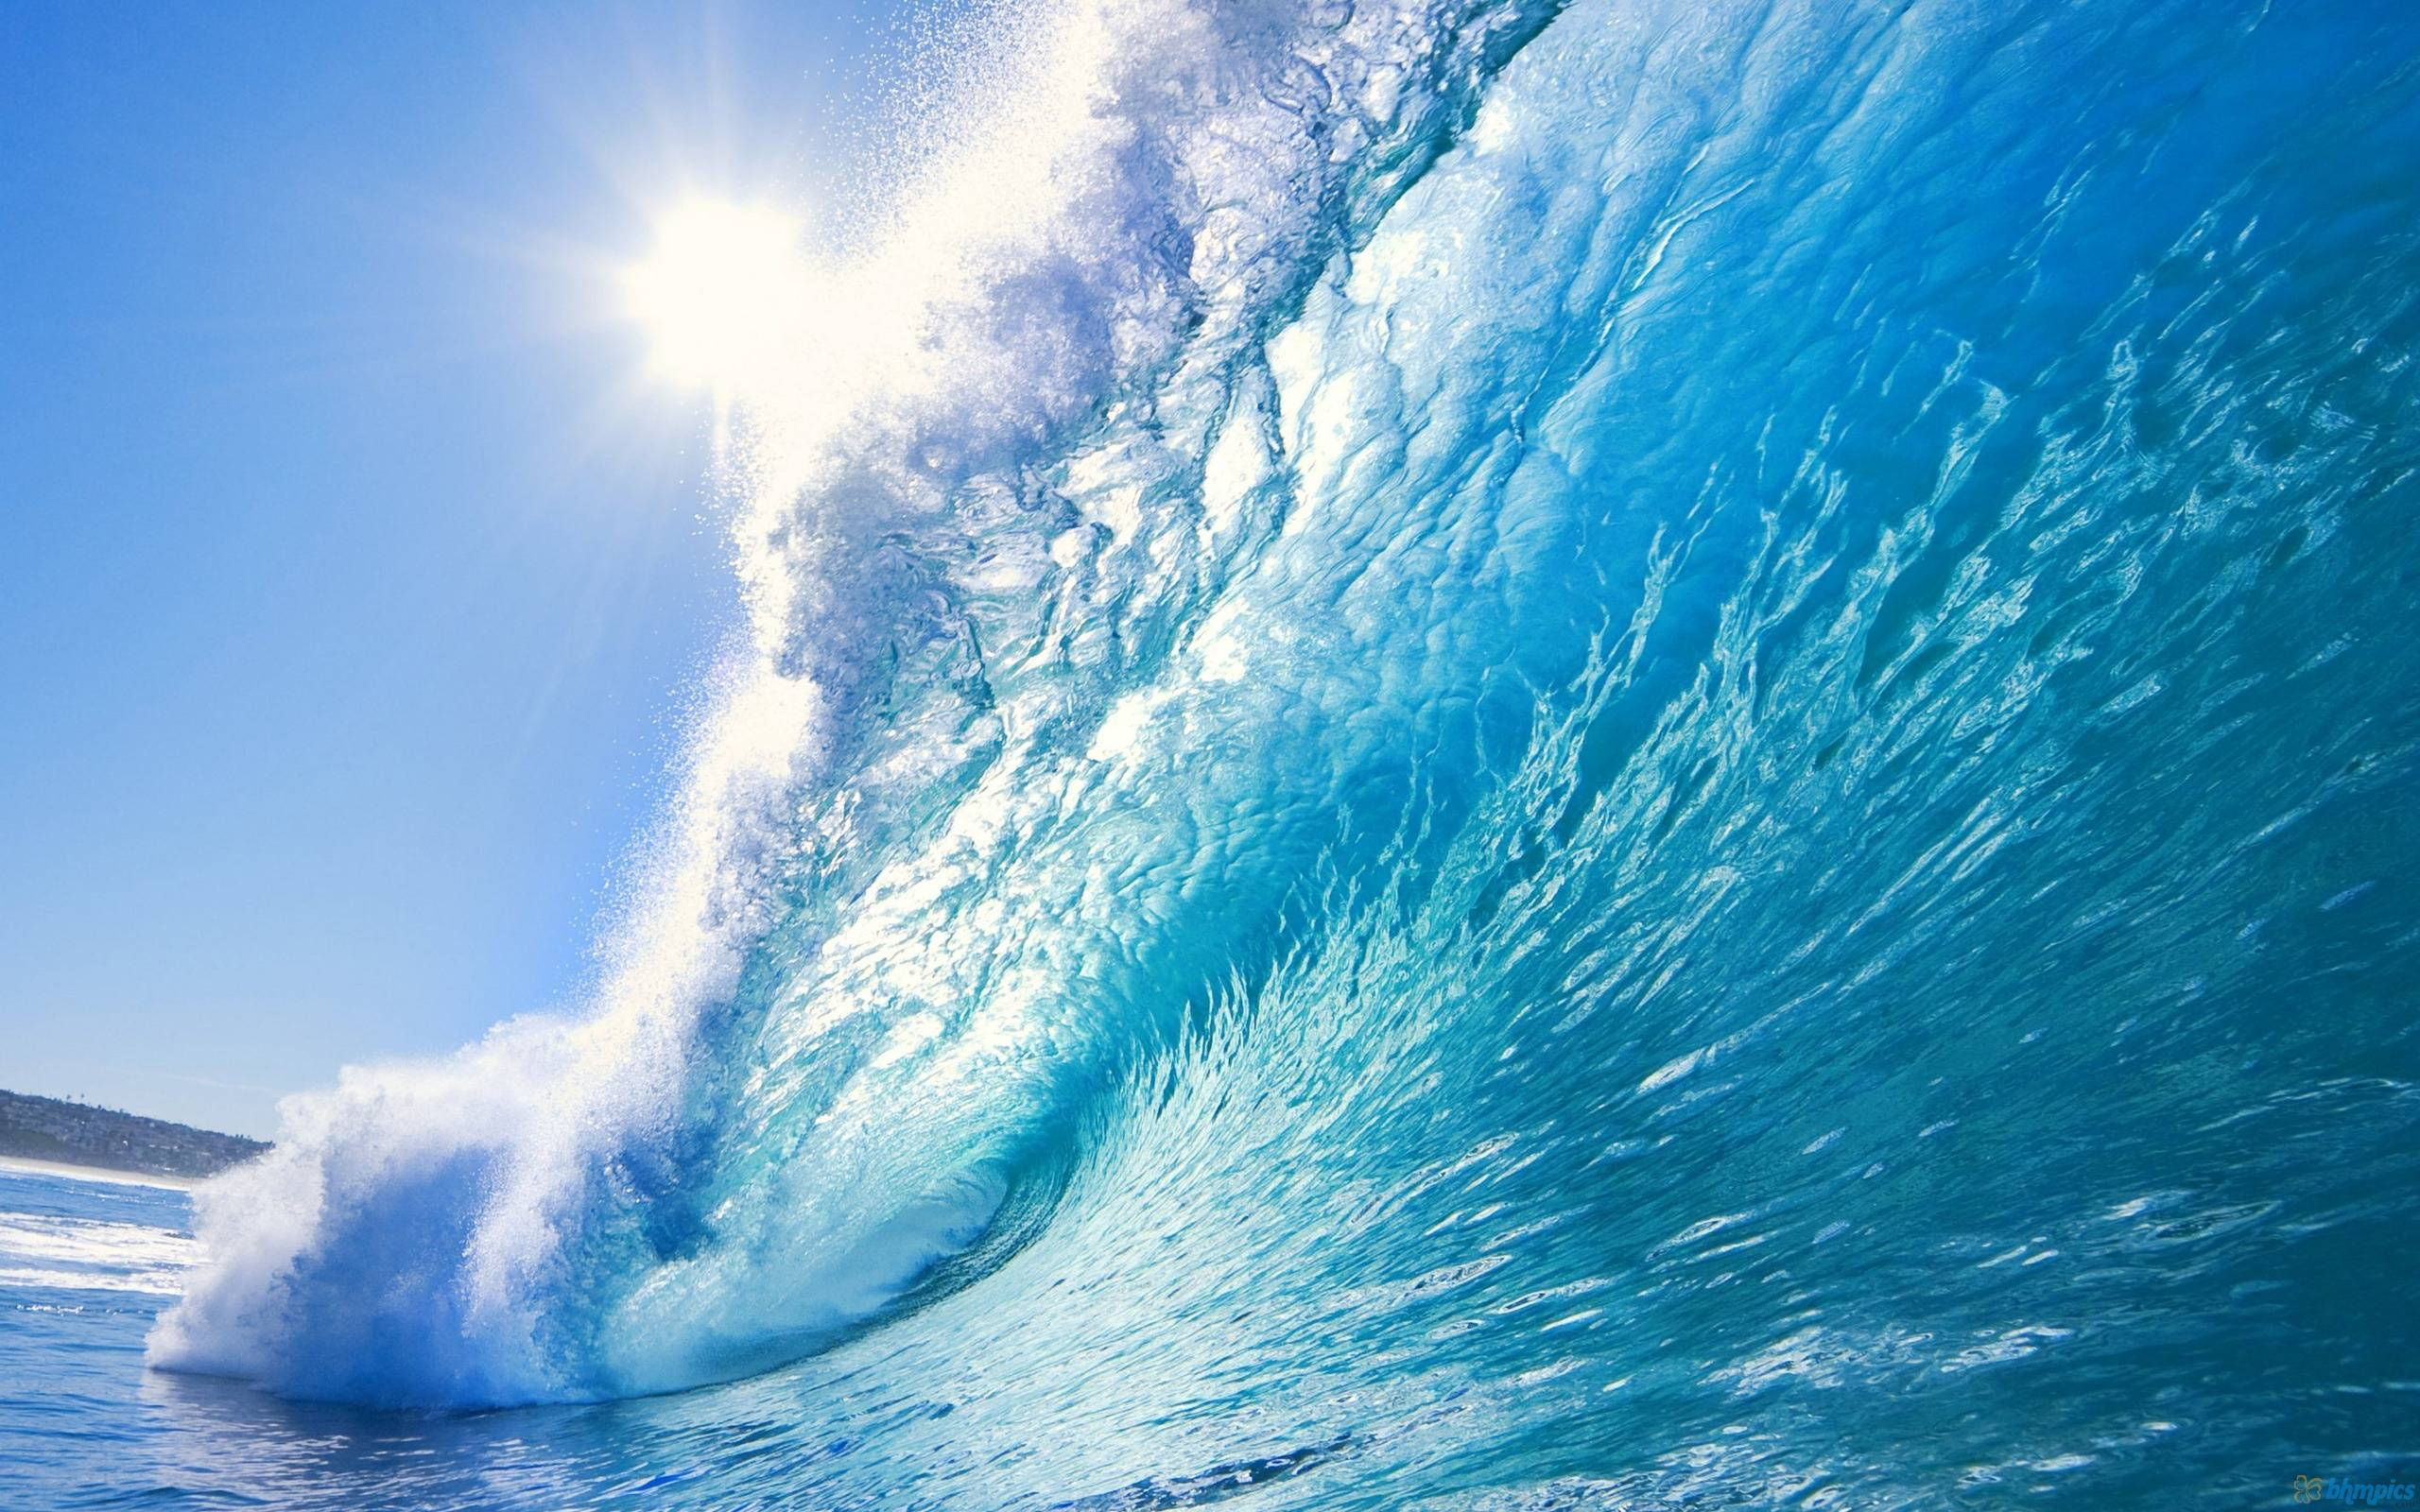 2560x1600 9 Awesome Wave Wallpapers to Decorate Backgrounds Like an Apple Product Shot | OSXDaily